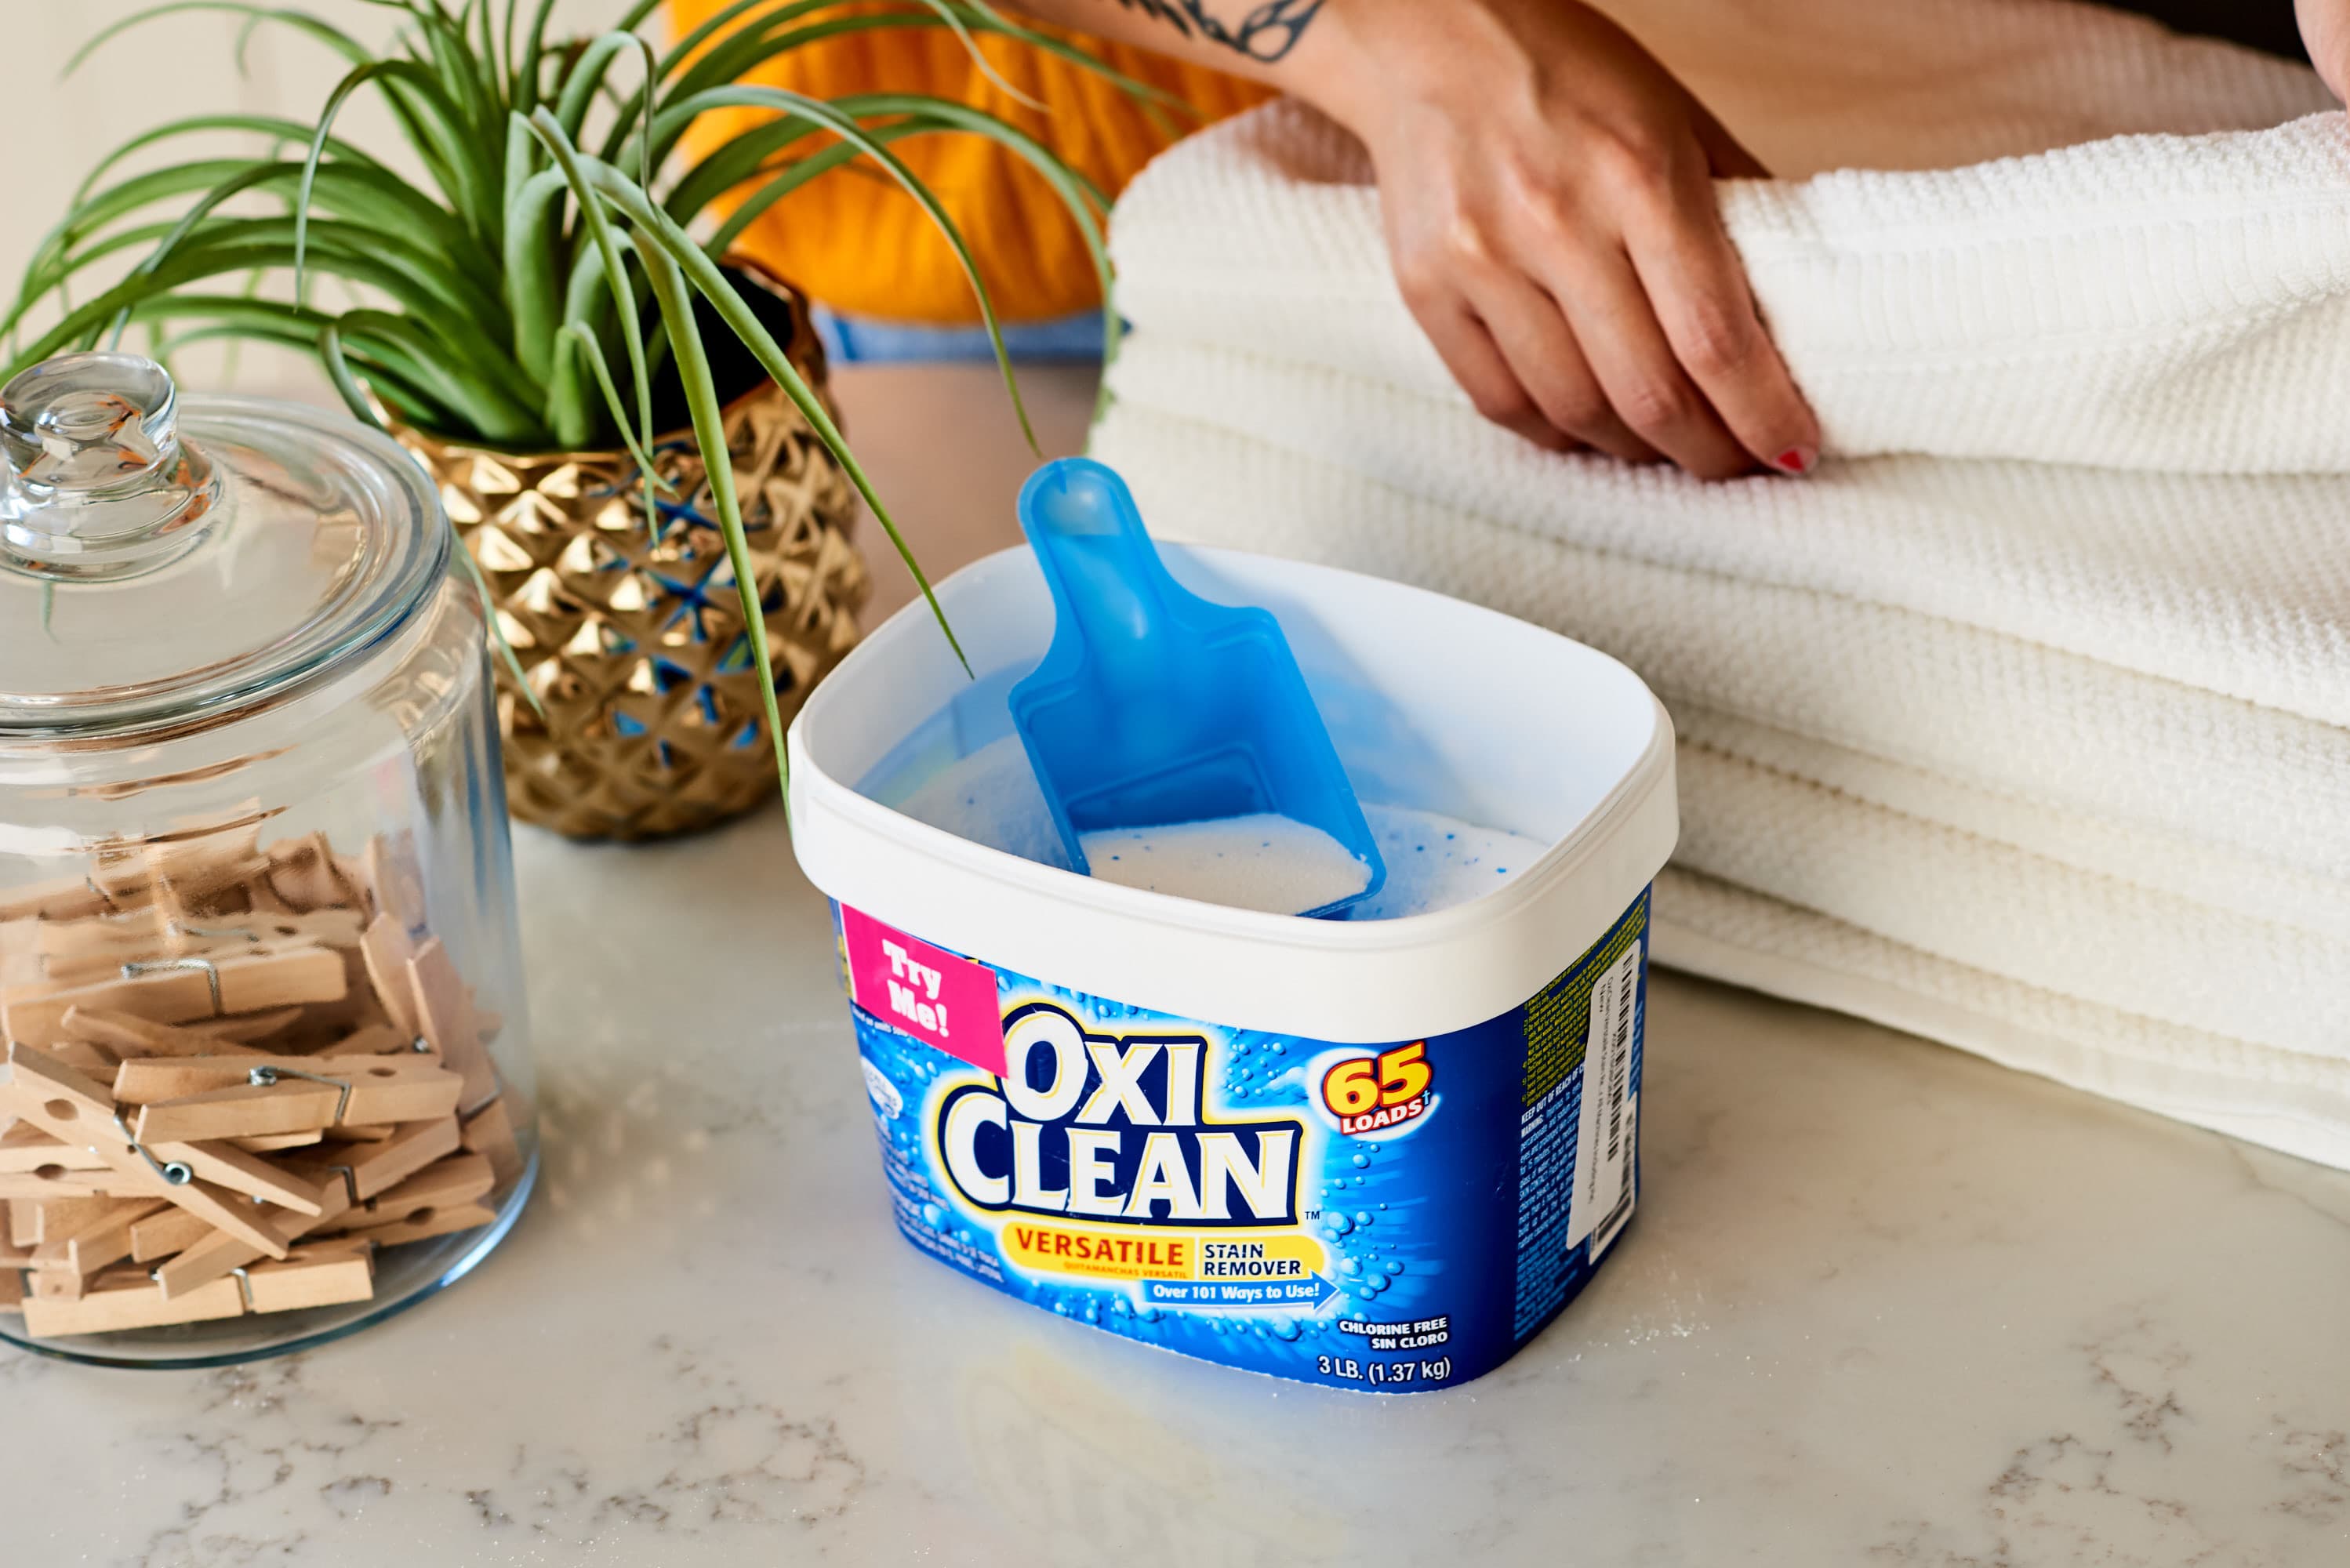 Never buy Oxi Clean again with this inexpensive DIY recipe